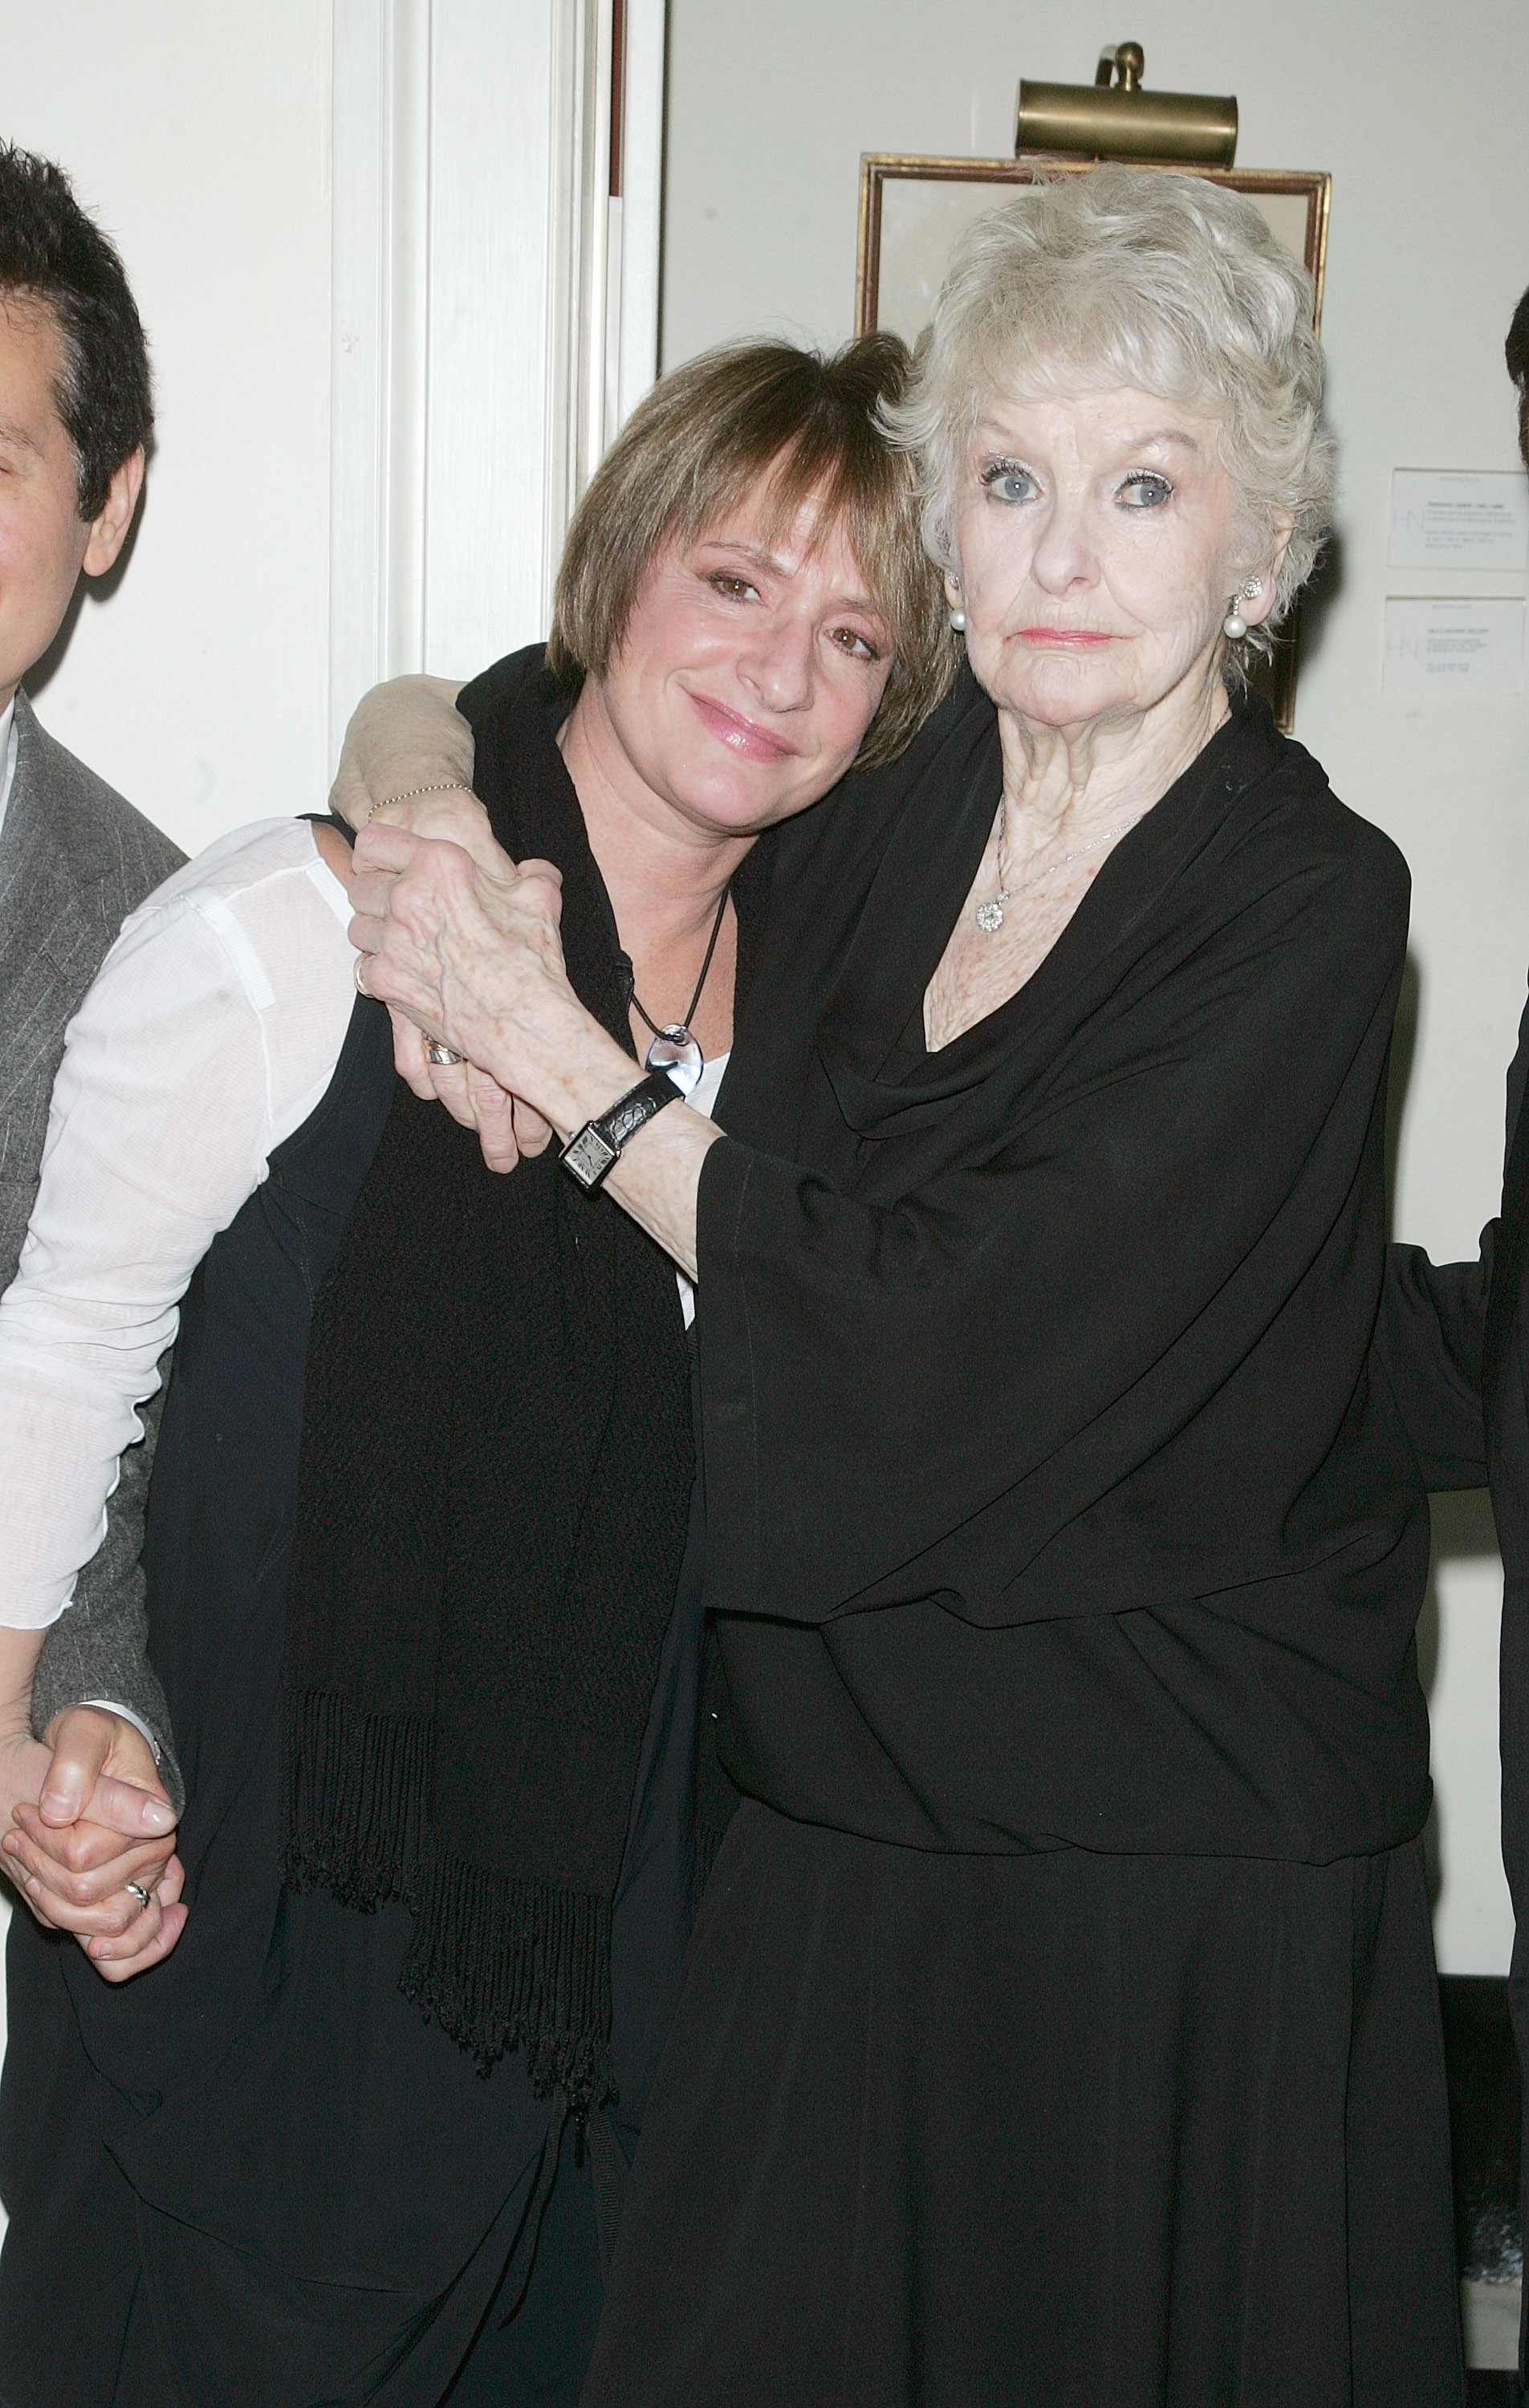 Patti LuPone and Elaine Stritch attend  the final night of "At Home At The Carlyle: Elaine Stritch Singin' Sondheim...One Song At A Time" at the Cafe Carlyle on February 2, 2010 in New York City. Elaine also celebrated her 85th Birthday on the final performance of her cabaret show. (Jim Spellman&mdash;WireImage)